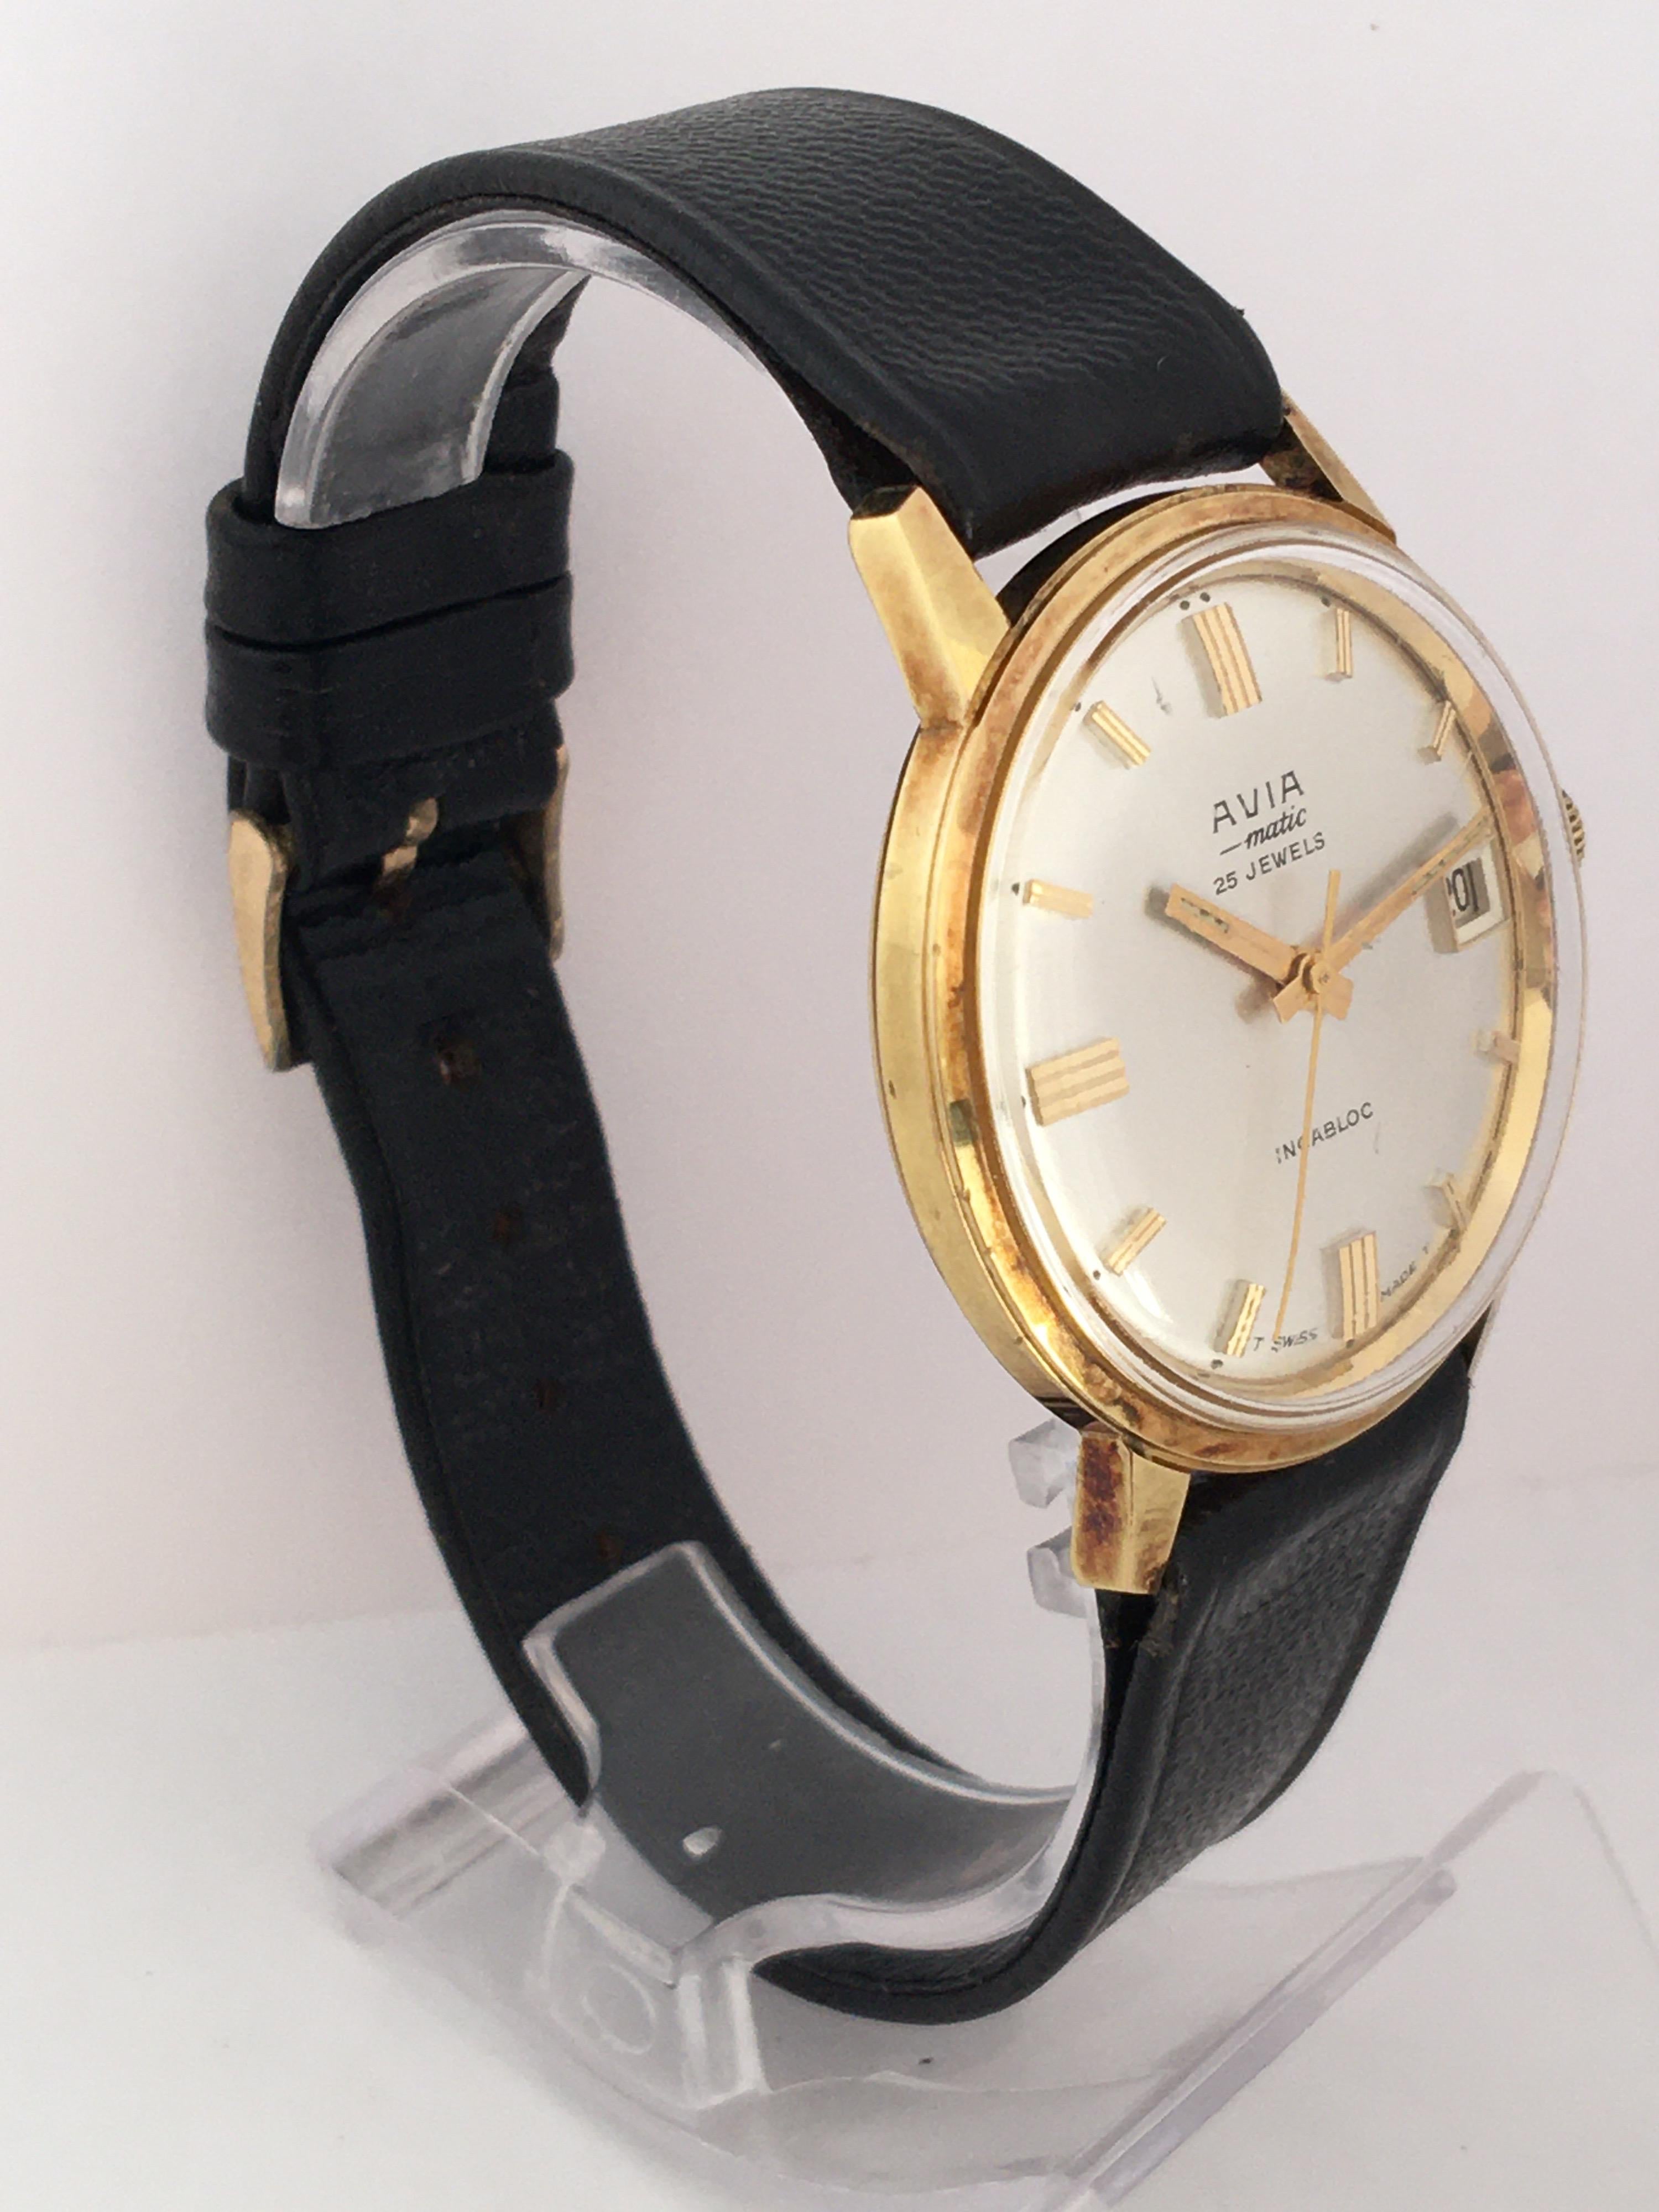 This beautiful 25 jewels gold plated automatic vintage pre-owned watch is working and it is running. This watch shows a gentle used and ageing with its original black leather strap as shown.

Please study the images carefully as form part of the